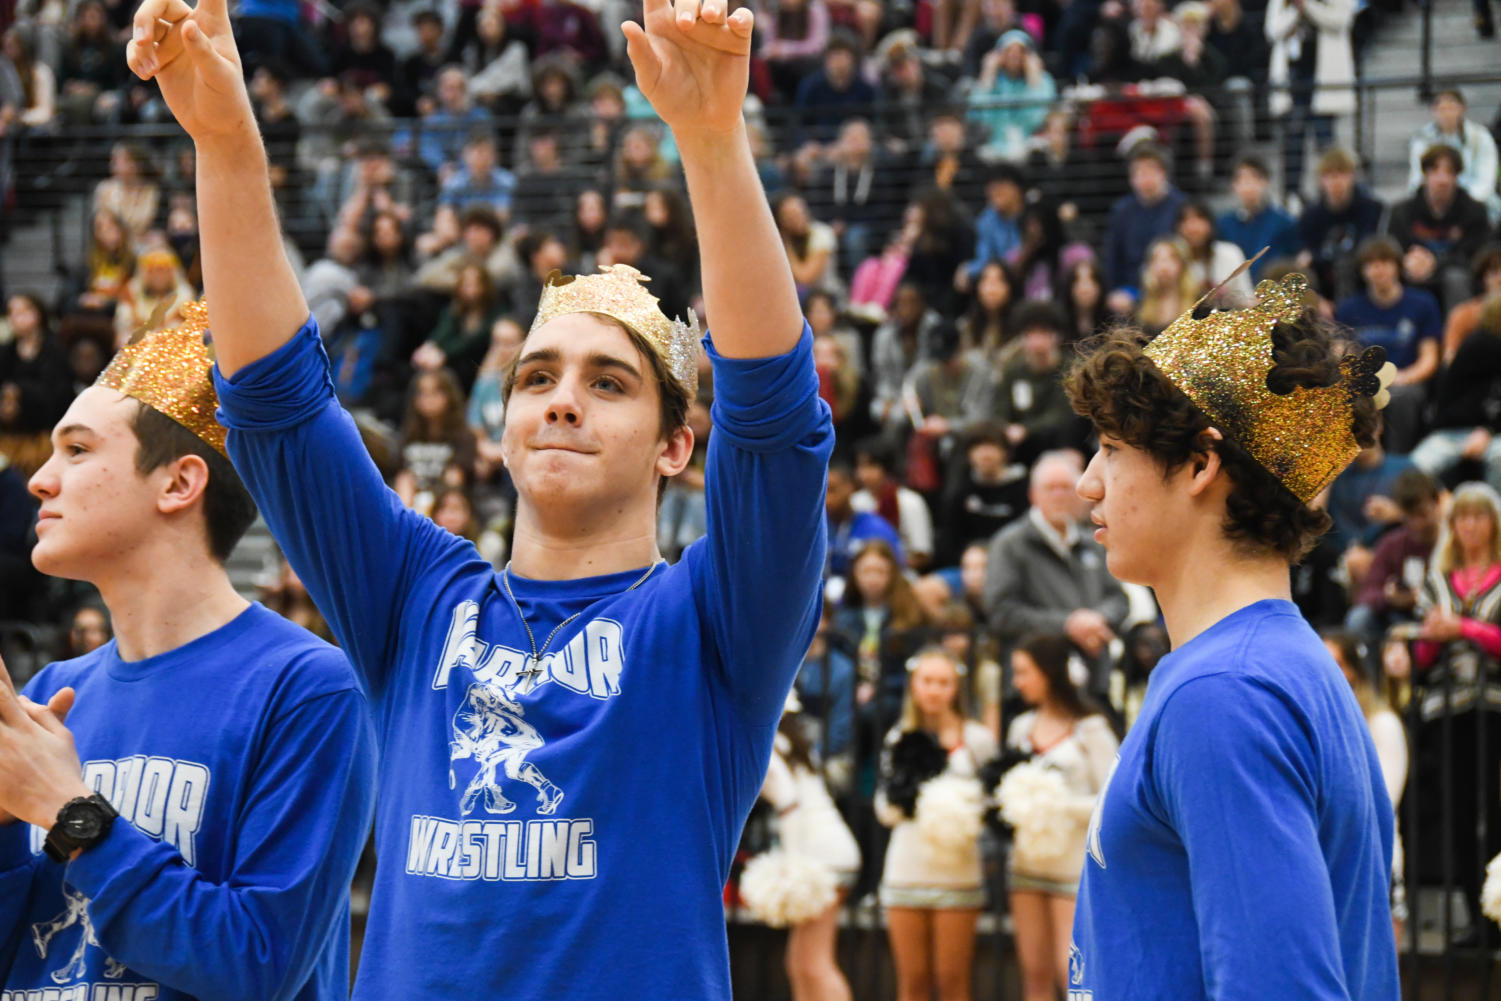 Senior Jacob Pelbath, member of the wrestling team, points to the crowd while they cheer for him.